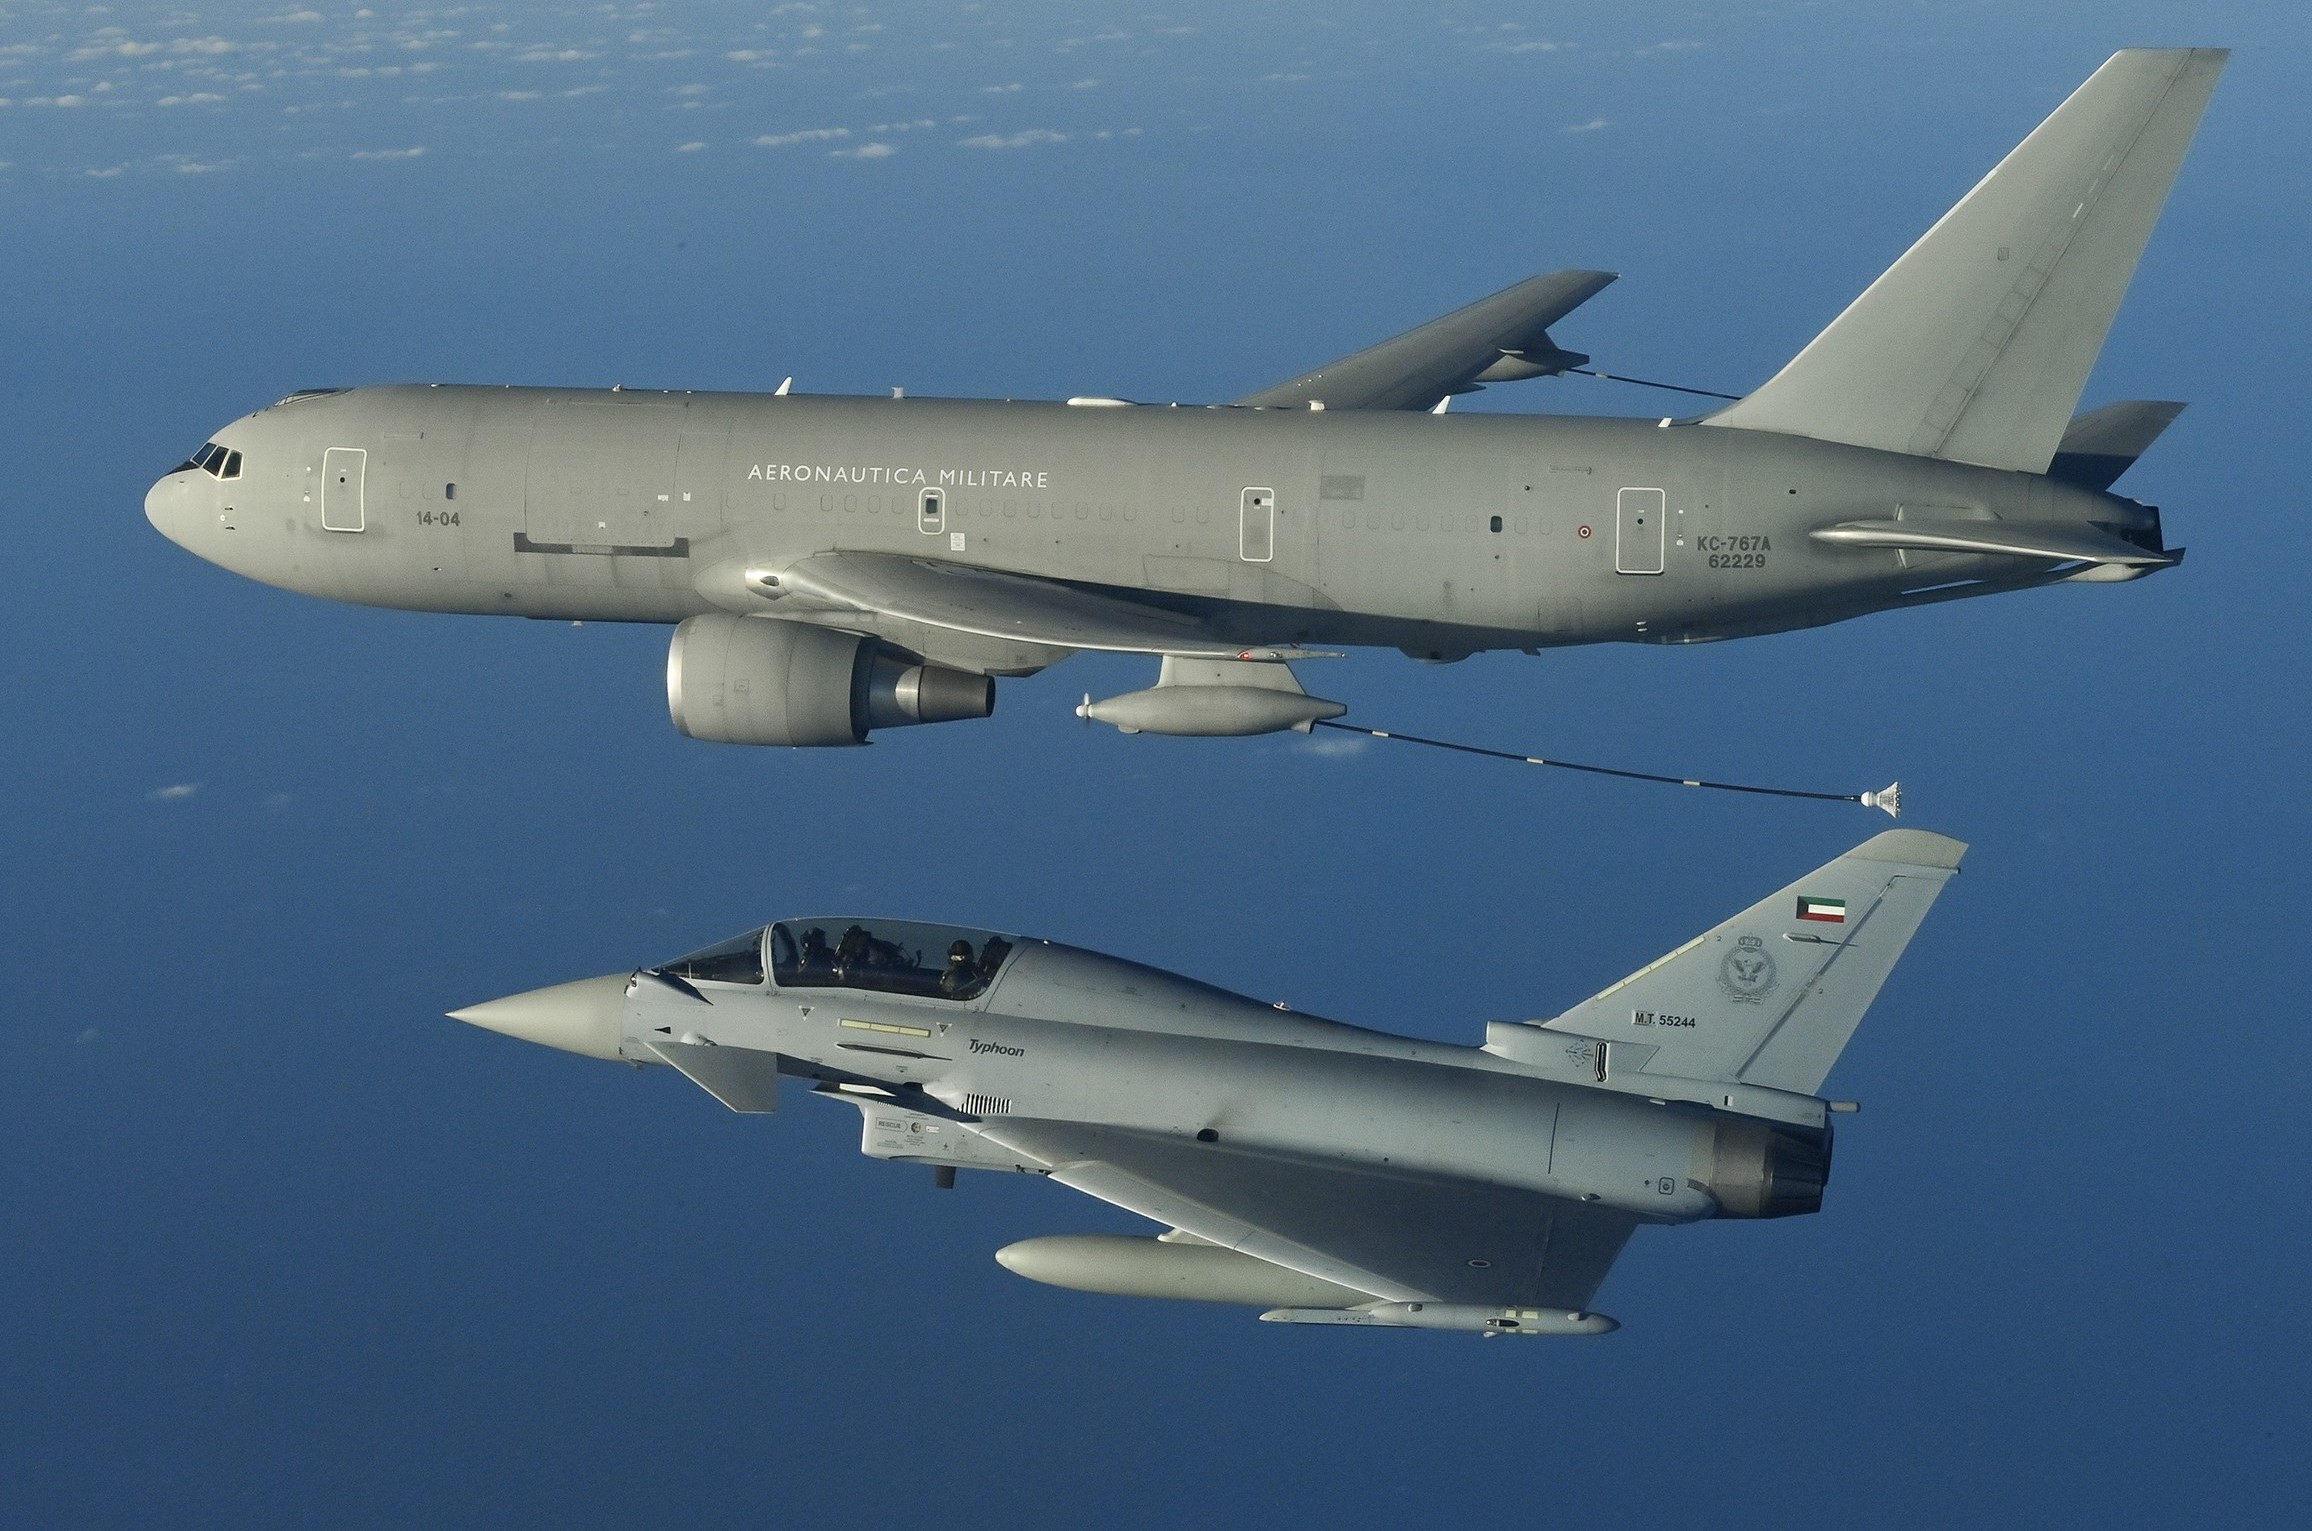 Italian tanker air-to-air refuels Kuwaitis fighters